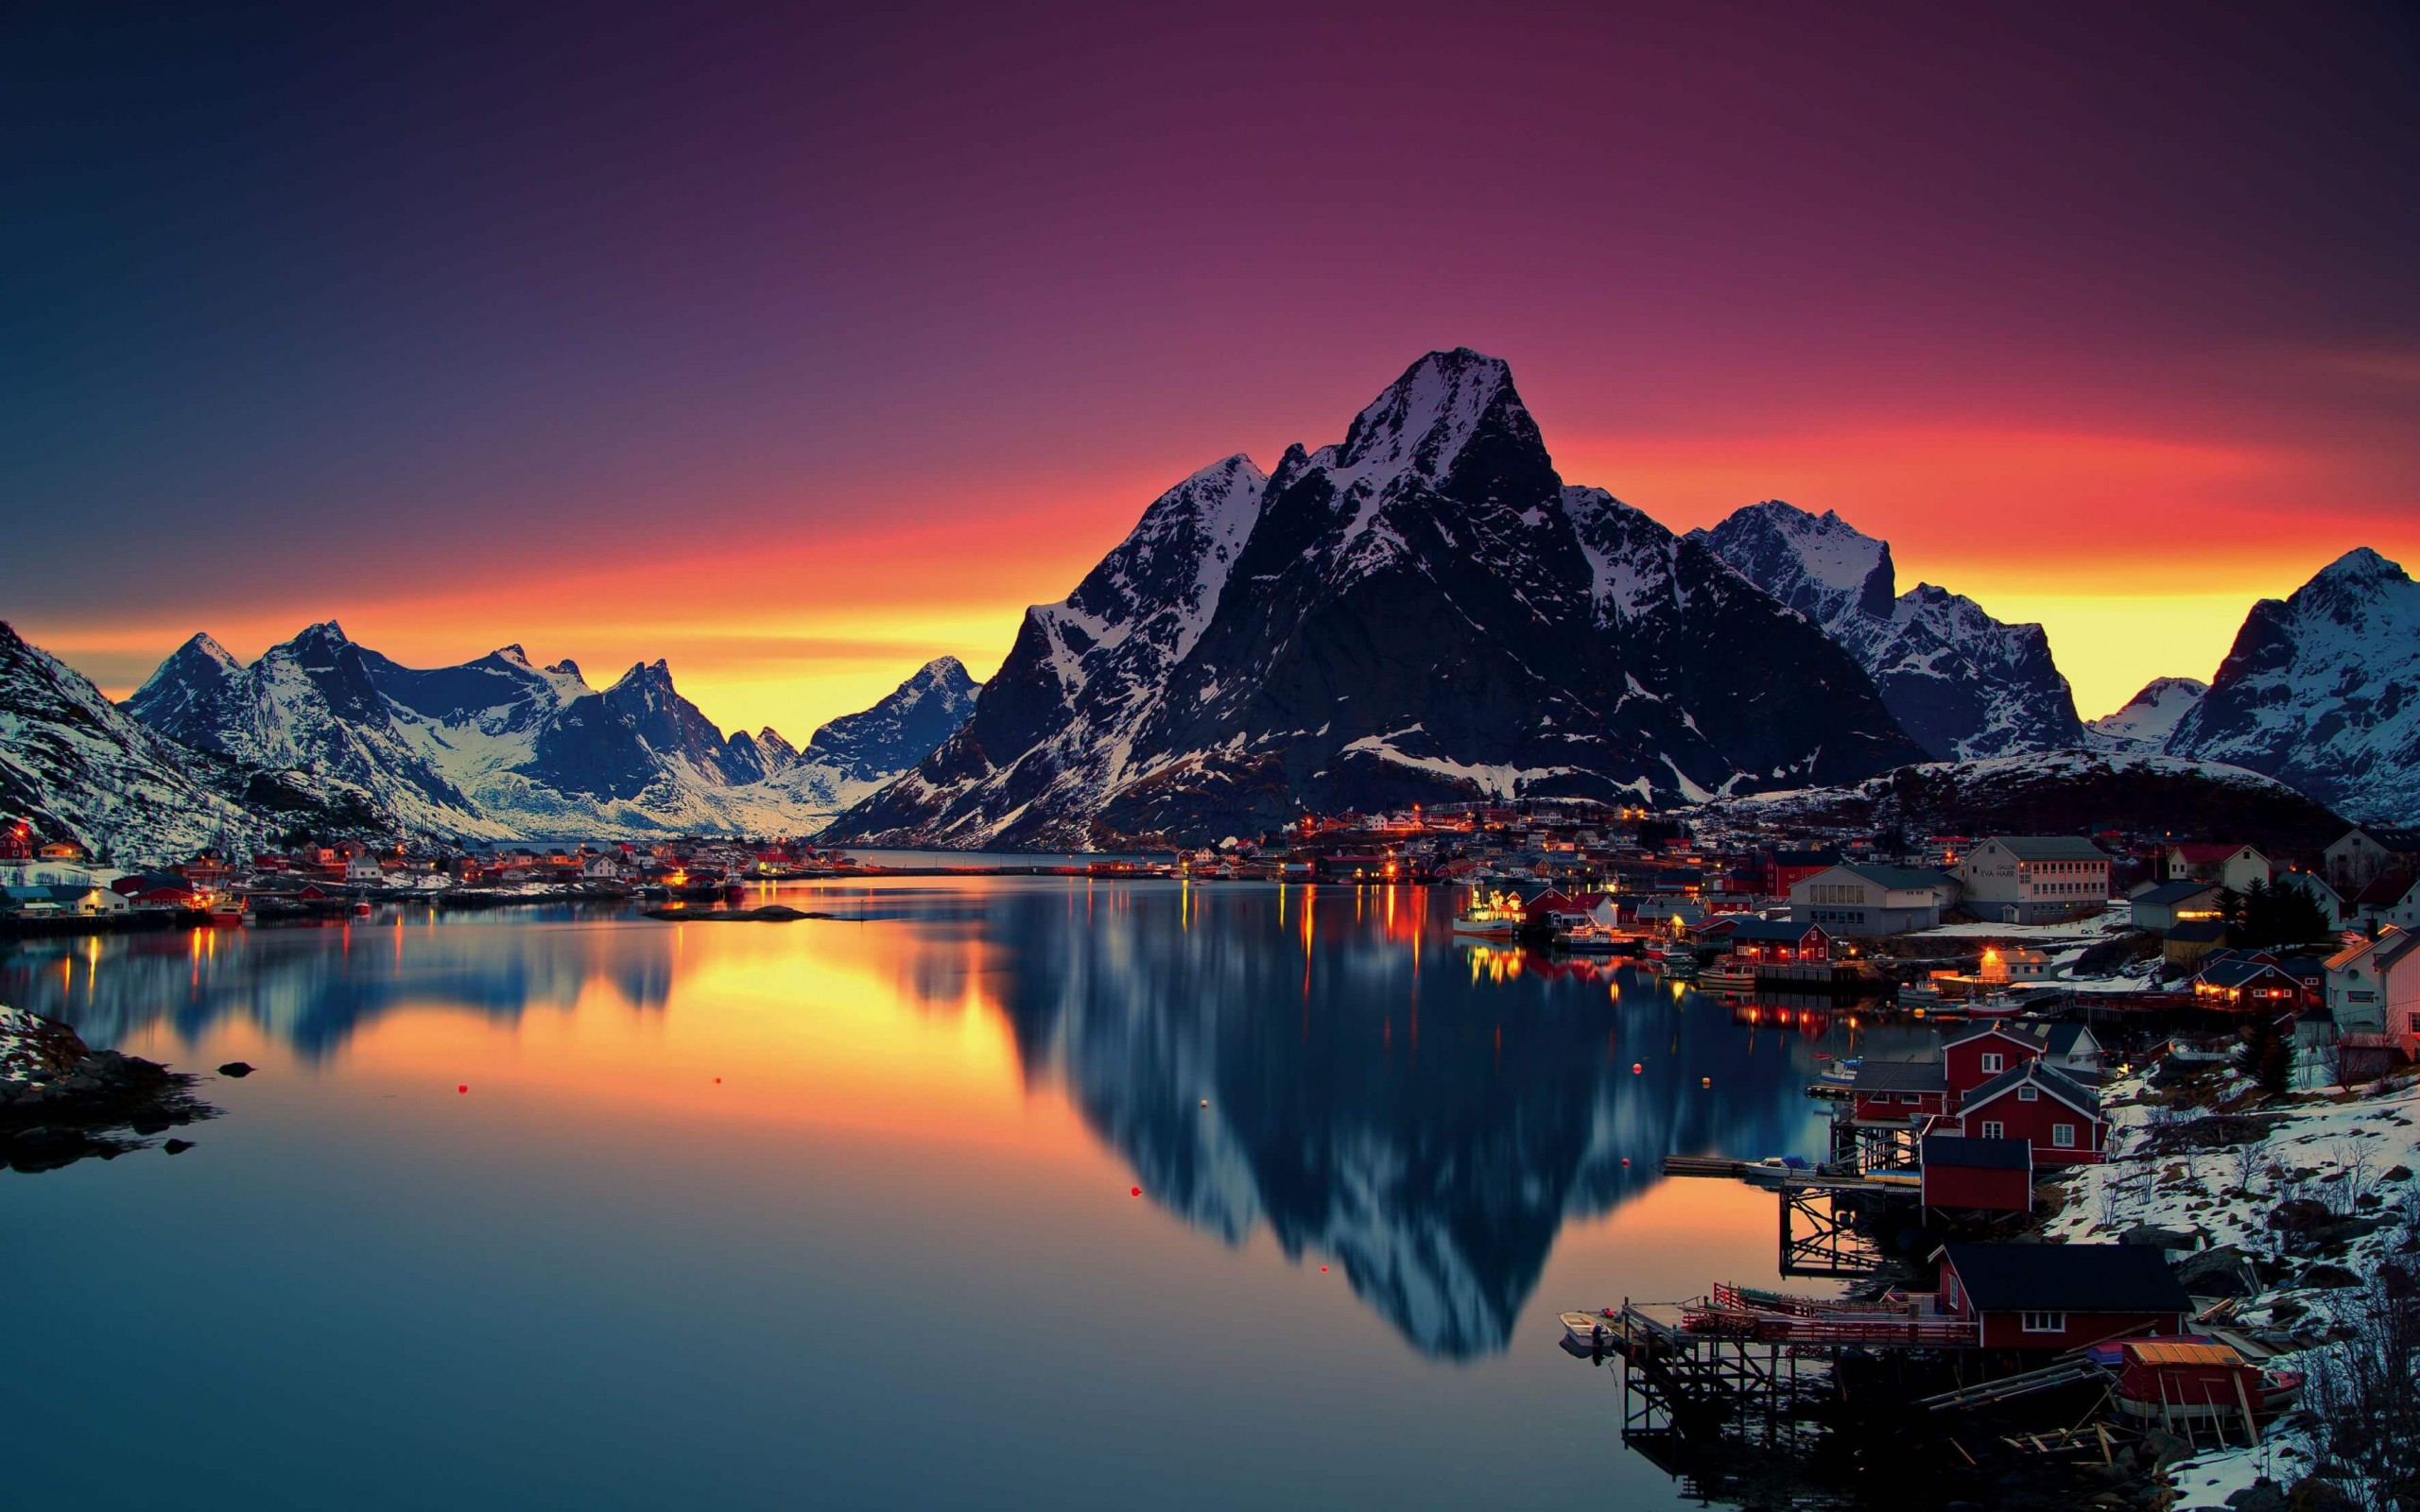 Free Download Islands Norway Hd Wallpaper For 2560 X 1600 Hdwallpapersnet 2560x1600 For Your Desktop Mobile Tablet Explore 48 Hd Wallpaper 2560 X 1600 High Resolution Desktop Wallpaper 2560x1600 2560 X 1080 Wallpapers Hd Nature Wallpapers